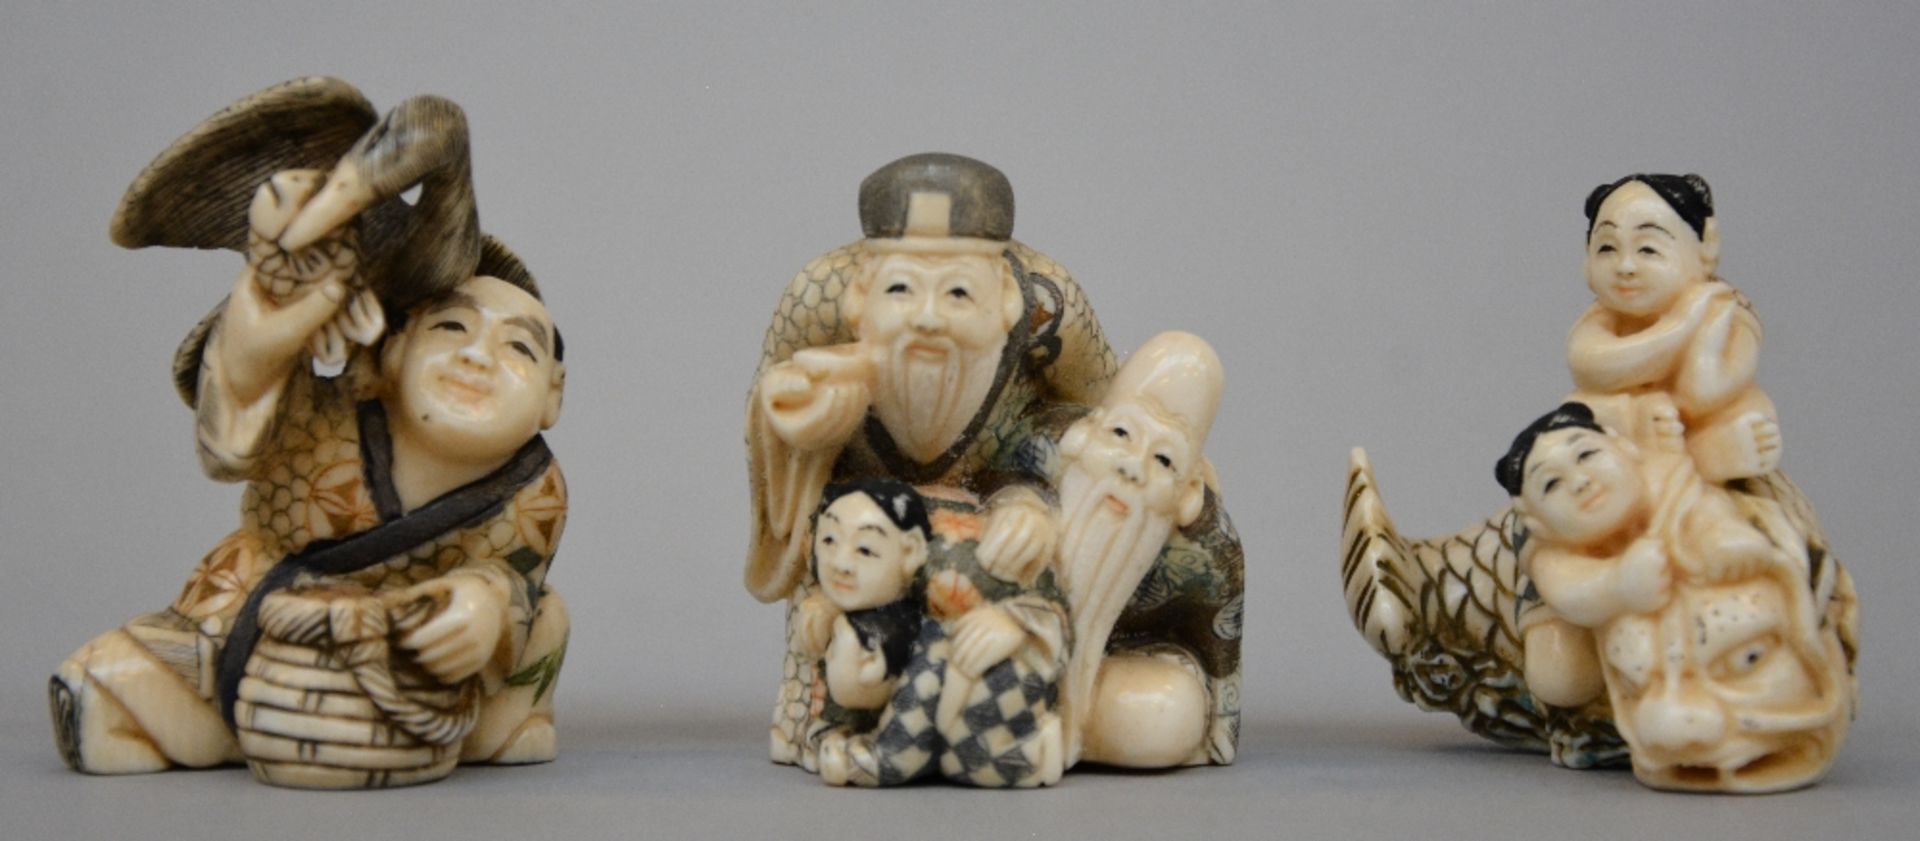 Seven ivory netsuke/okimino, scrimshaw decorated, first half of 20thC, H 5,2 - 4,1 cm, Total - Image 3 of 3